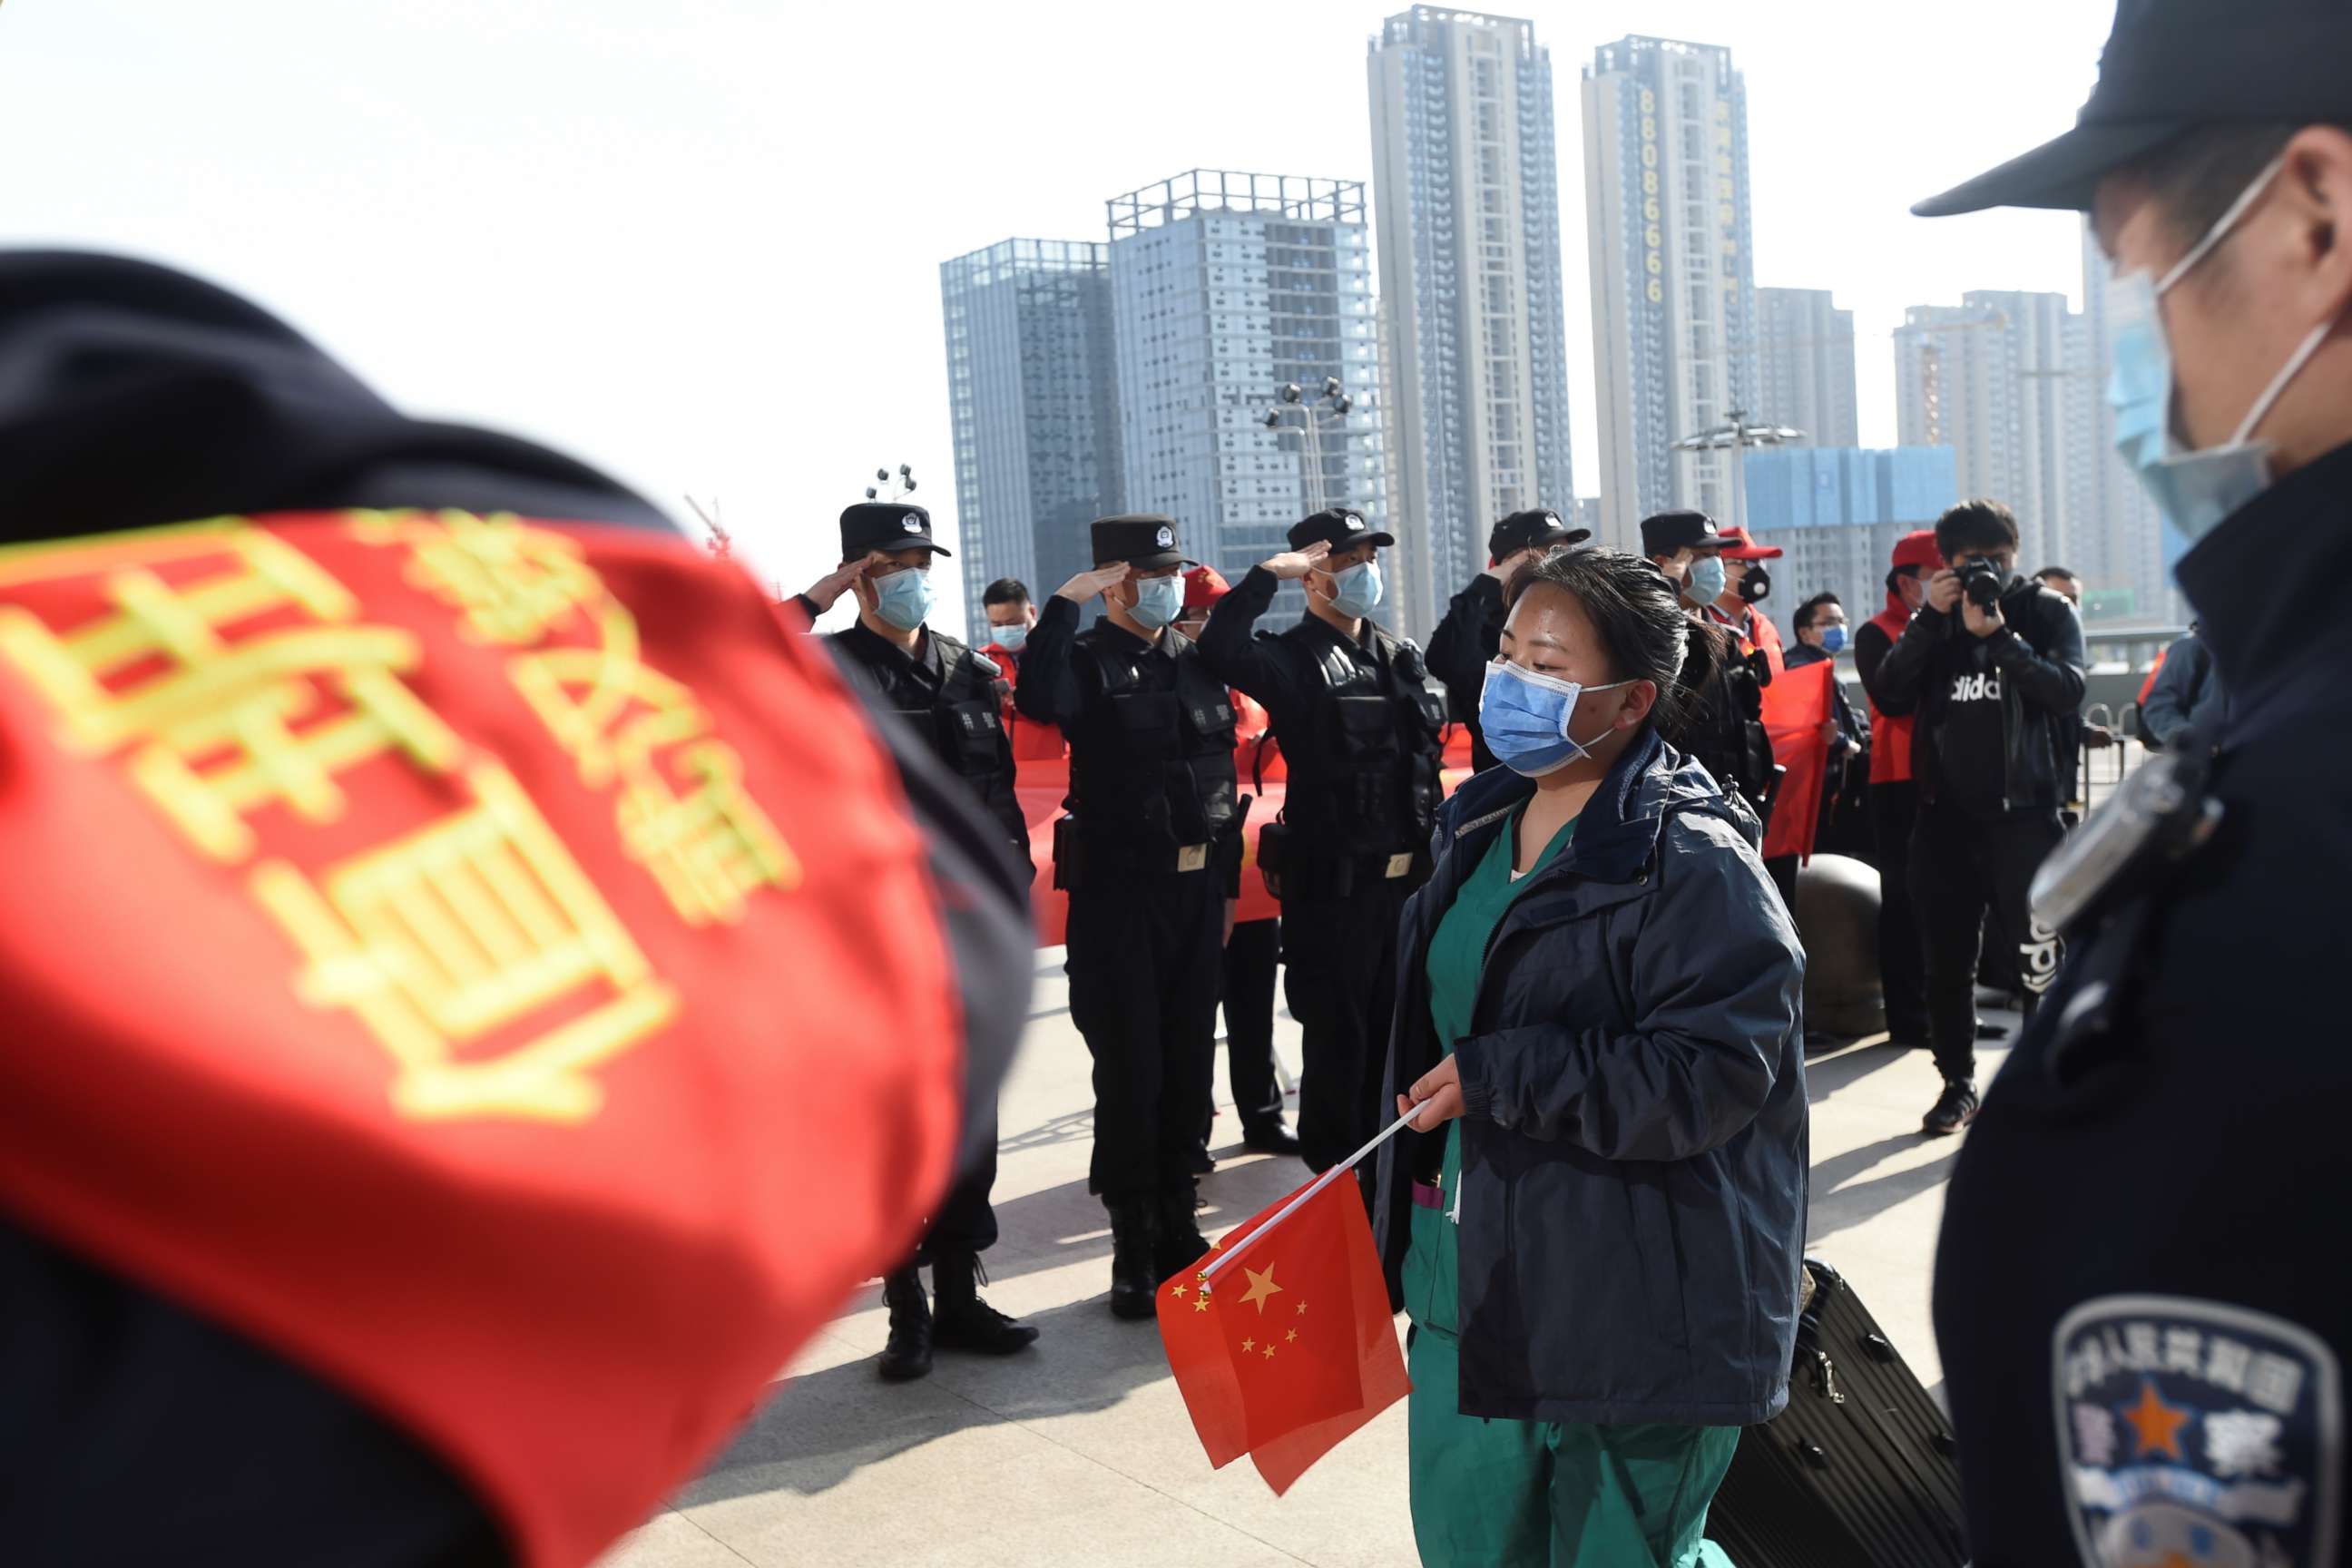 PHOTO: Chinese police officers salute as a medical worker arrives at the Wuhan Railway Station before leaving the epicenter of the novel coronavirus outbreak, in the city of Wuhan in China's central Hubei province, March 17, 2020.